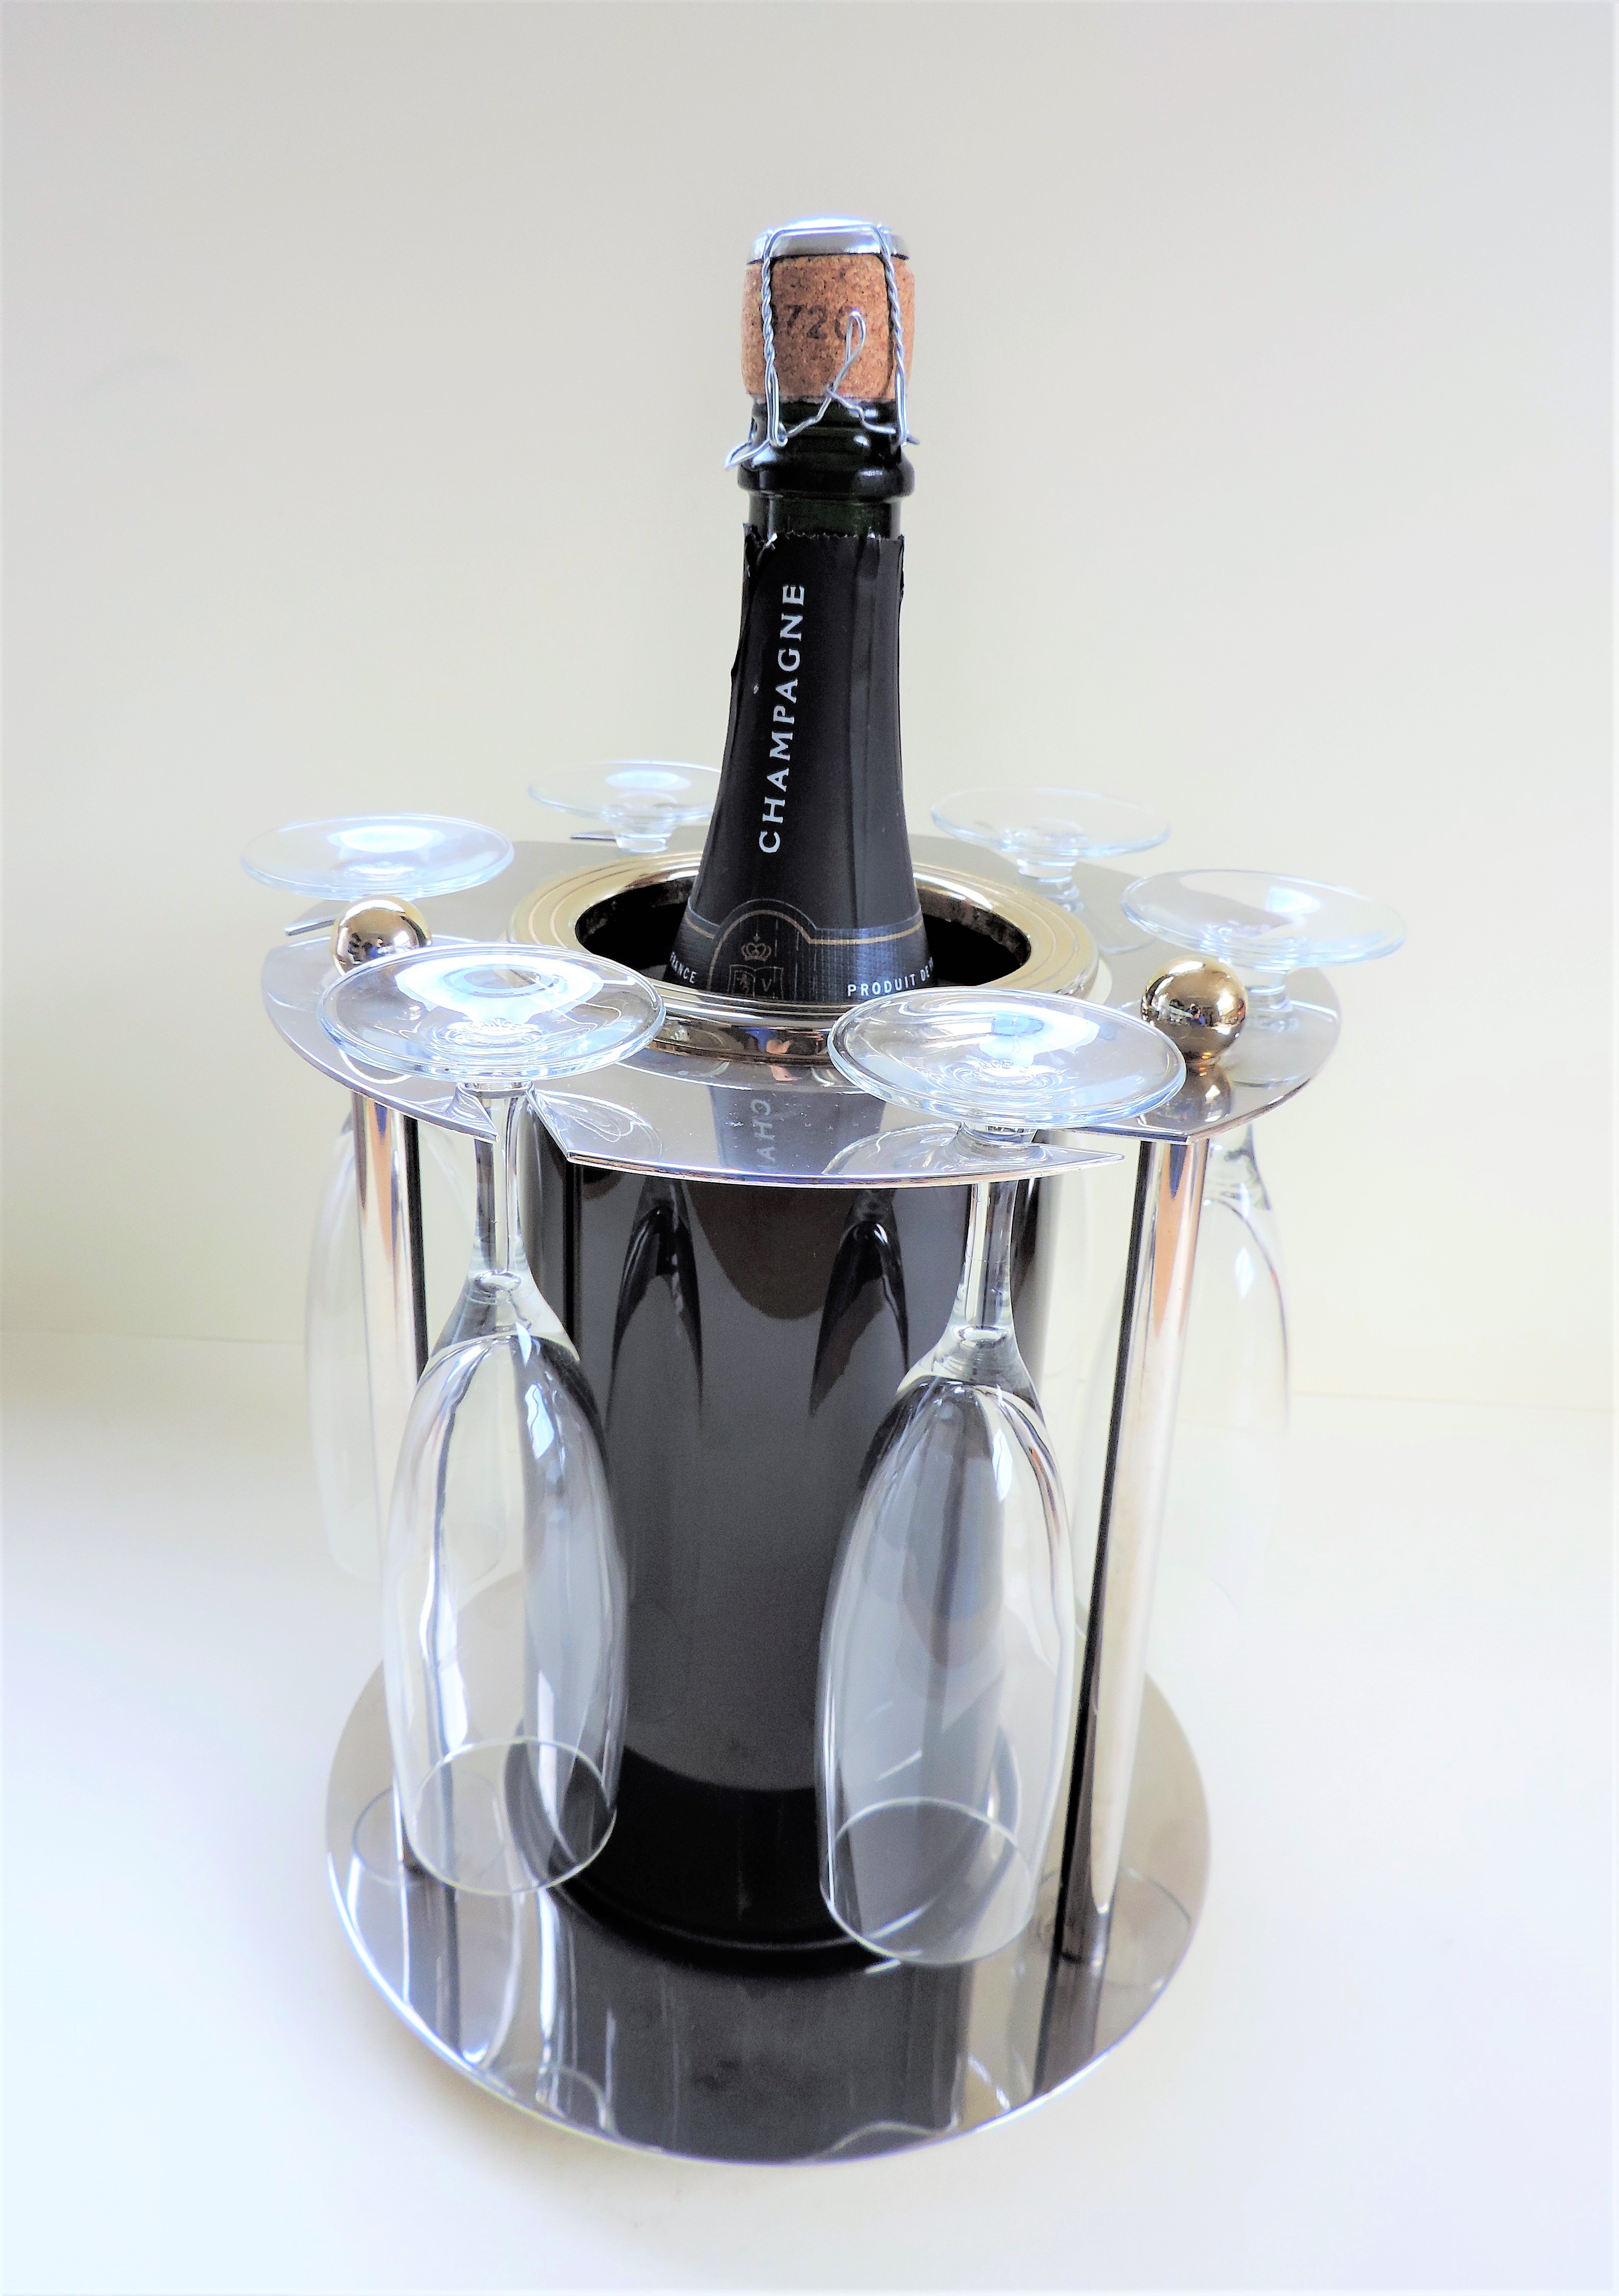 Novelty French Modernist Champagne Cooler, circa 1970's - Image 2 of 11